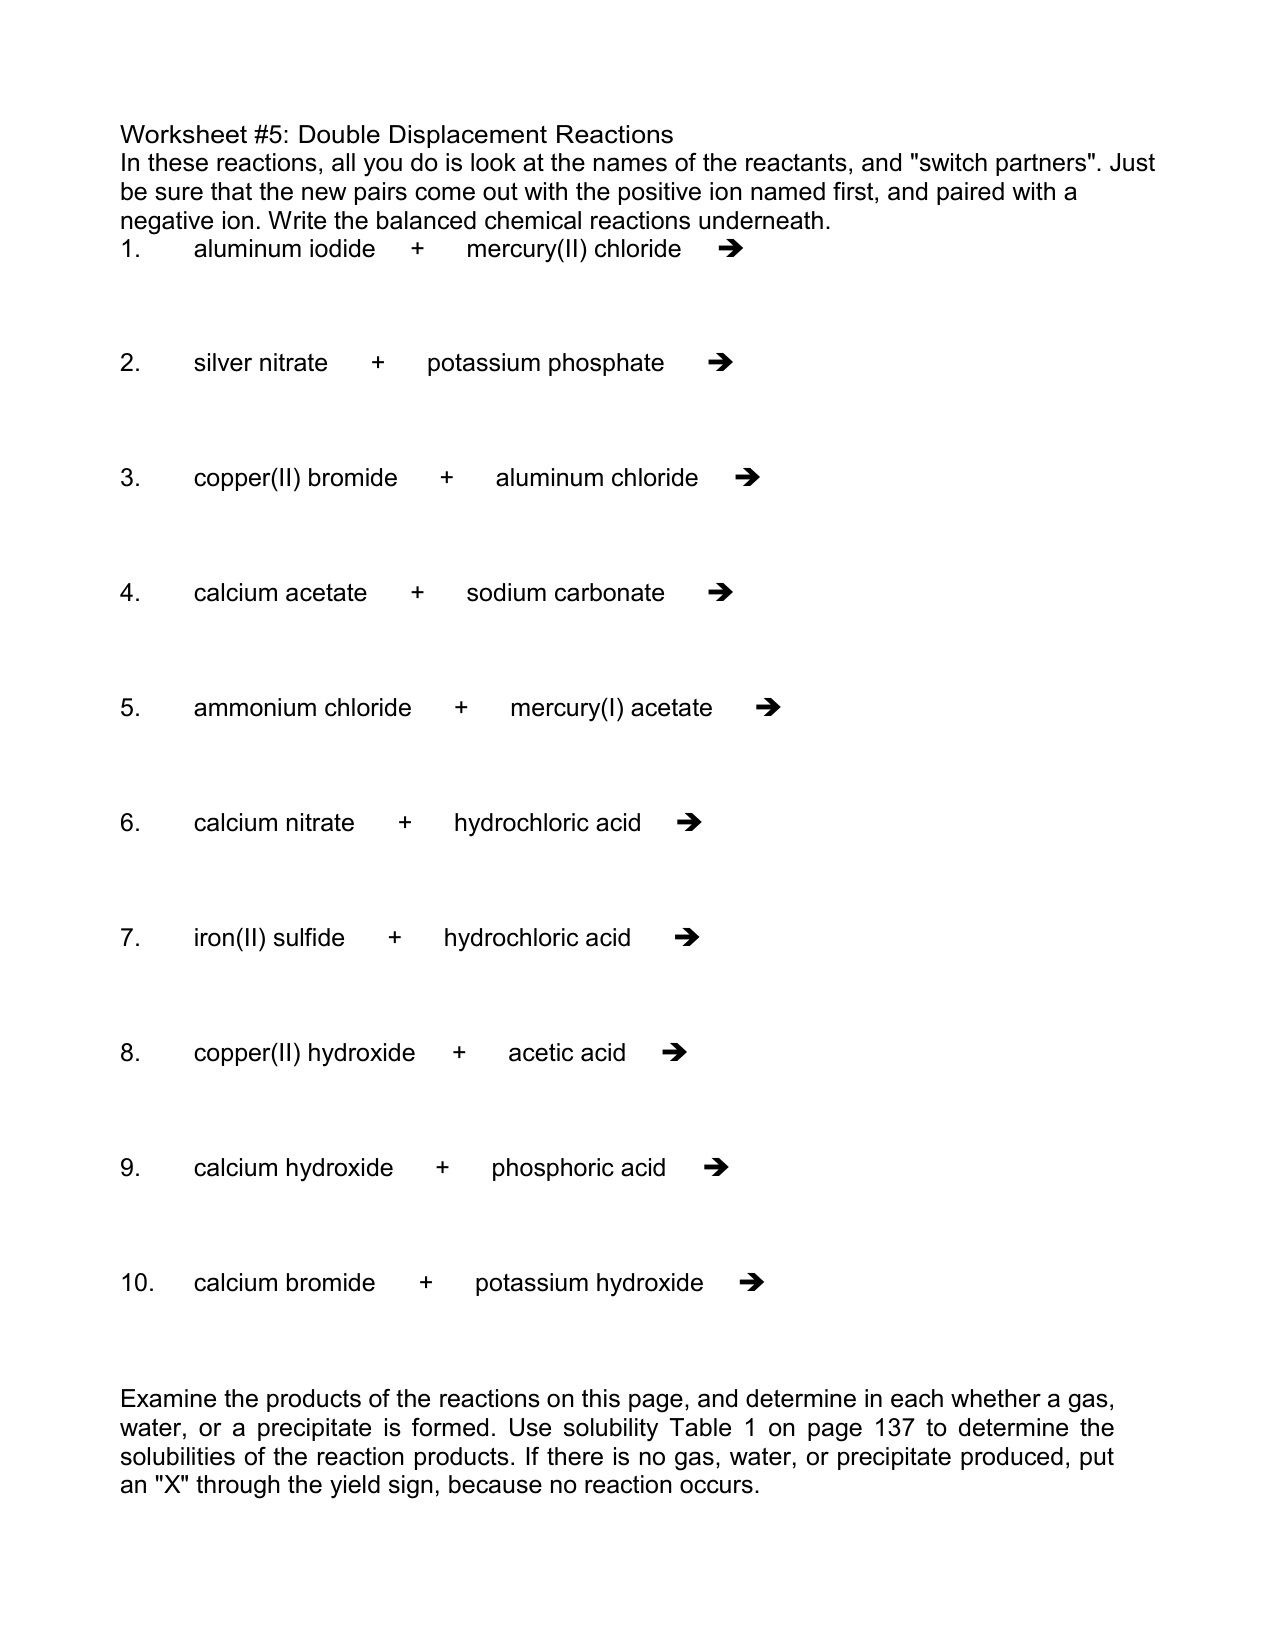 Double Replacement Reaction Worksheet Free Download Goodimg co